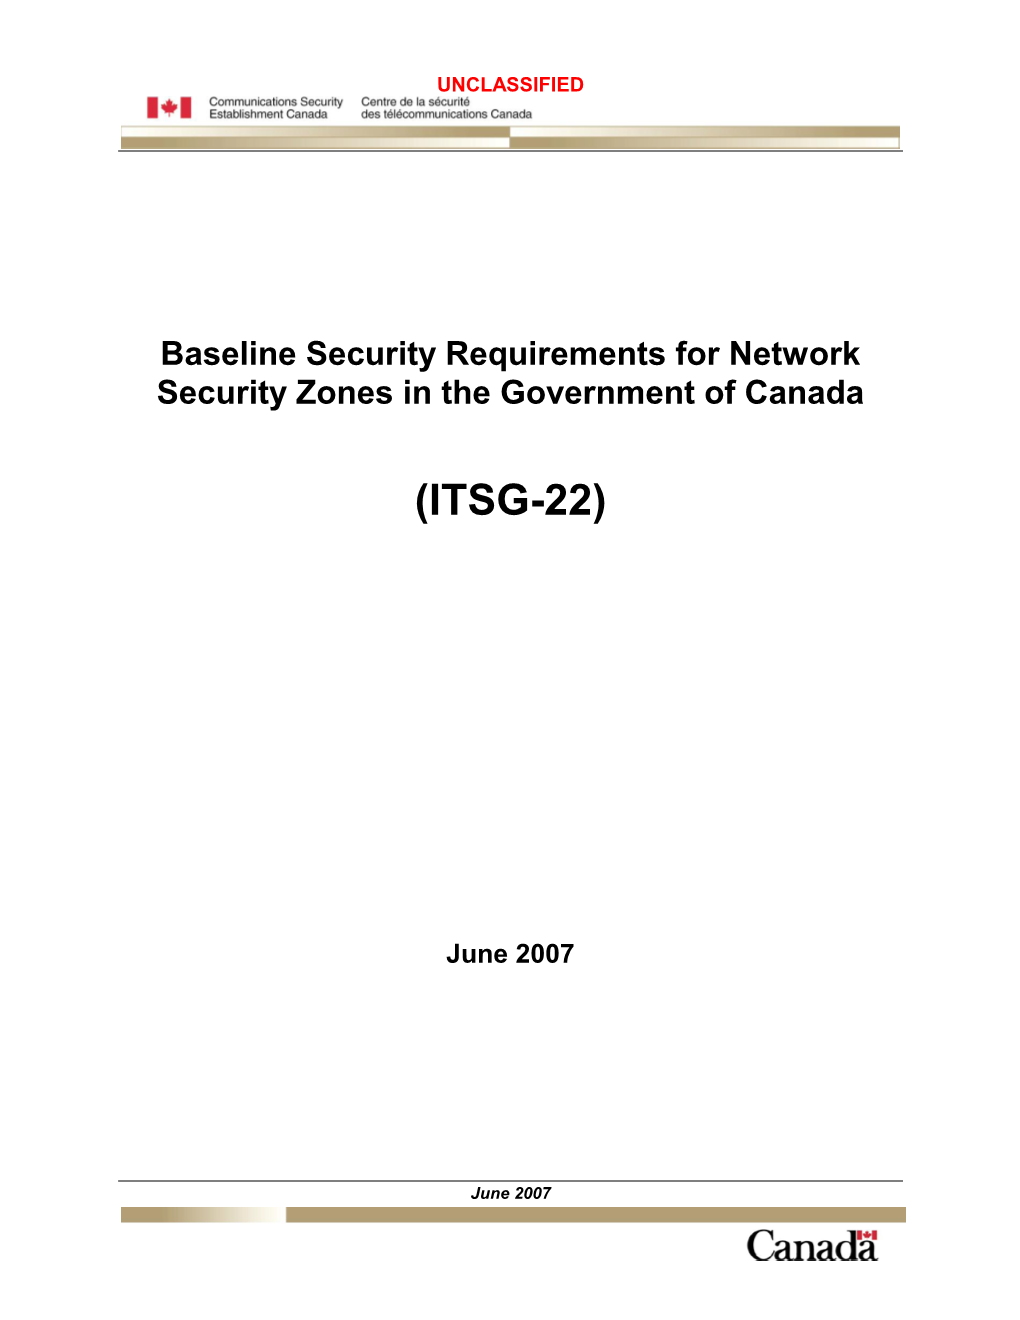 Baseline Security Requirements for Network Security Zones in the Government of Canada